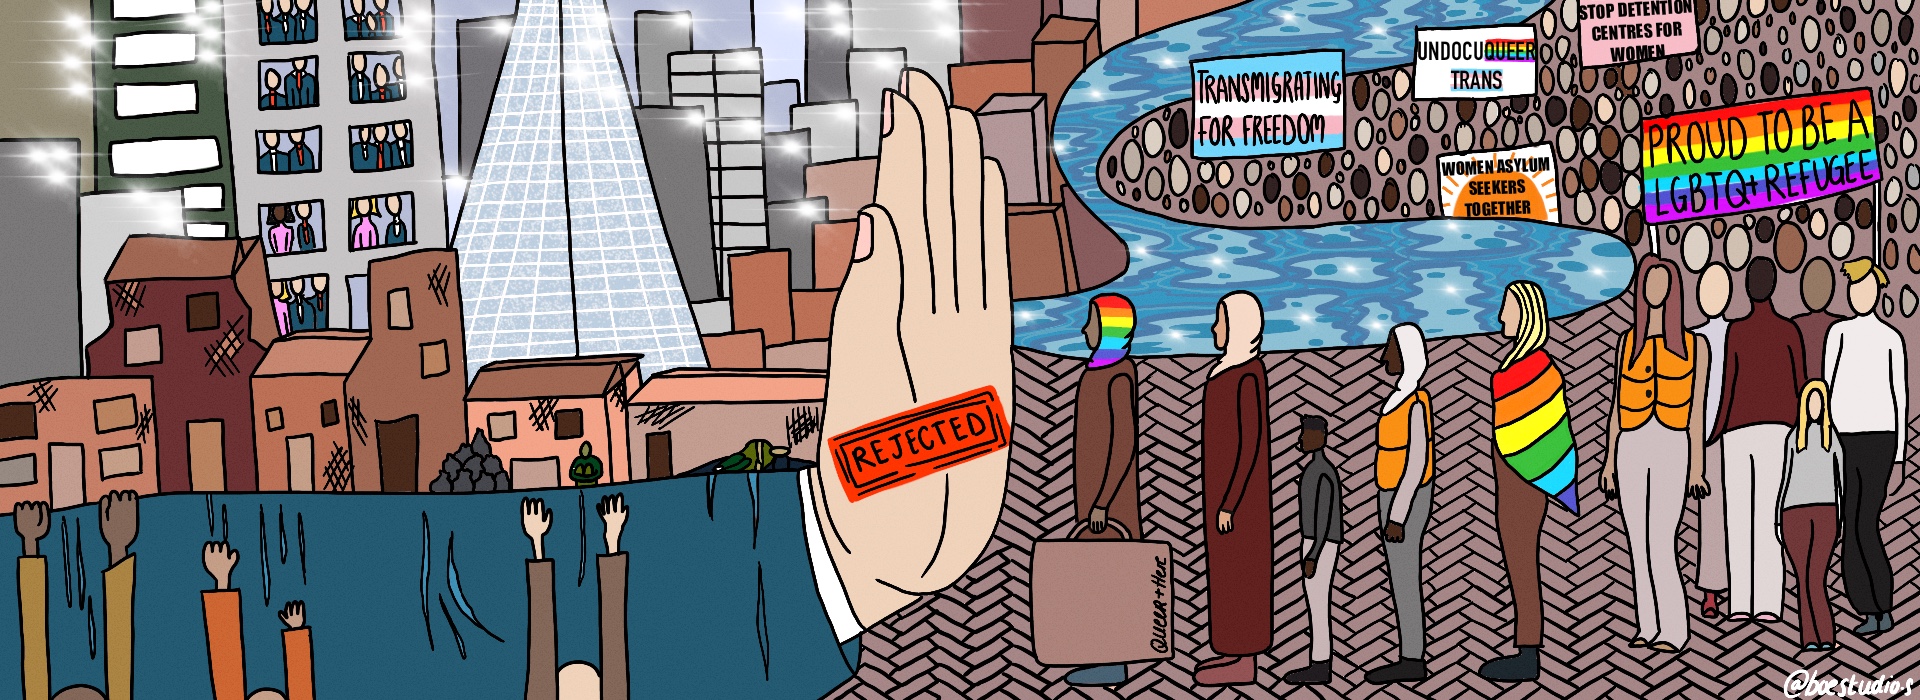 a gigantic hand stopping diverse refugees, including women in rainbow and rainbow hijab, people of diverse colours, age, being rejected from entering the city. a person is wrapped in the rainbow flag. some can be seen clinging on to the rejecting hand. there are 5 signs, which say proud to be a LGBTQ+ refugee, stop detention centers for women, women asylum seekers together, trans migrating for freedom, and undocu queer trans. behind the rejecting hand is the city. a few buildings can be seen. there are people from the building who are observing the situation